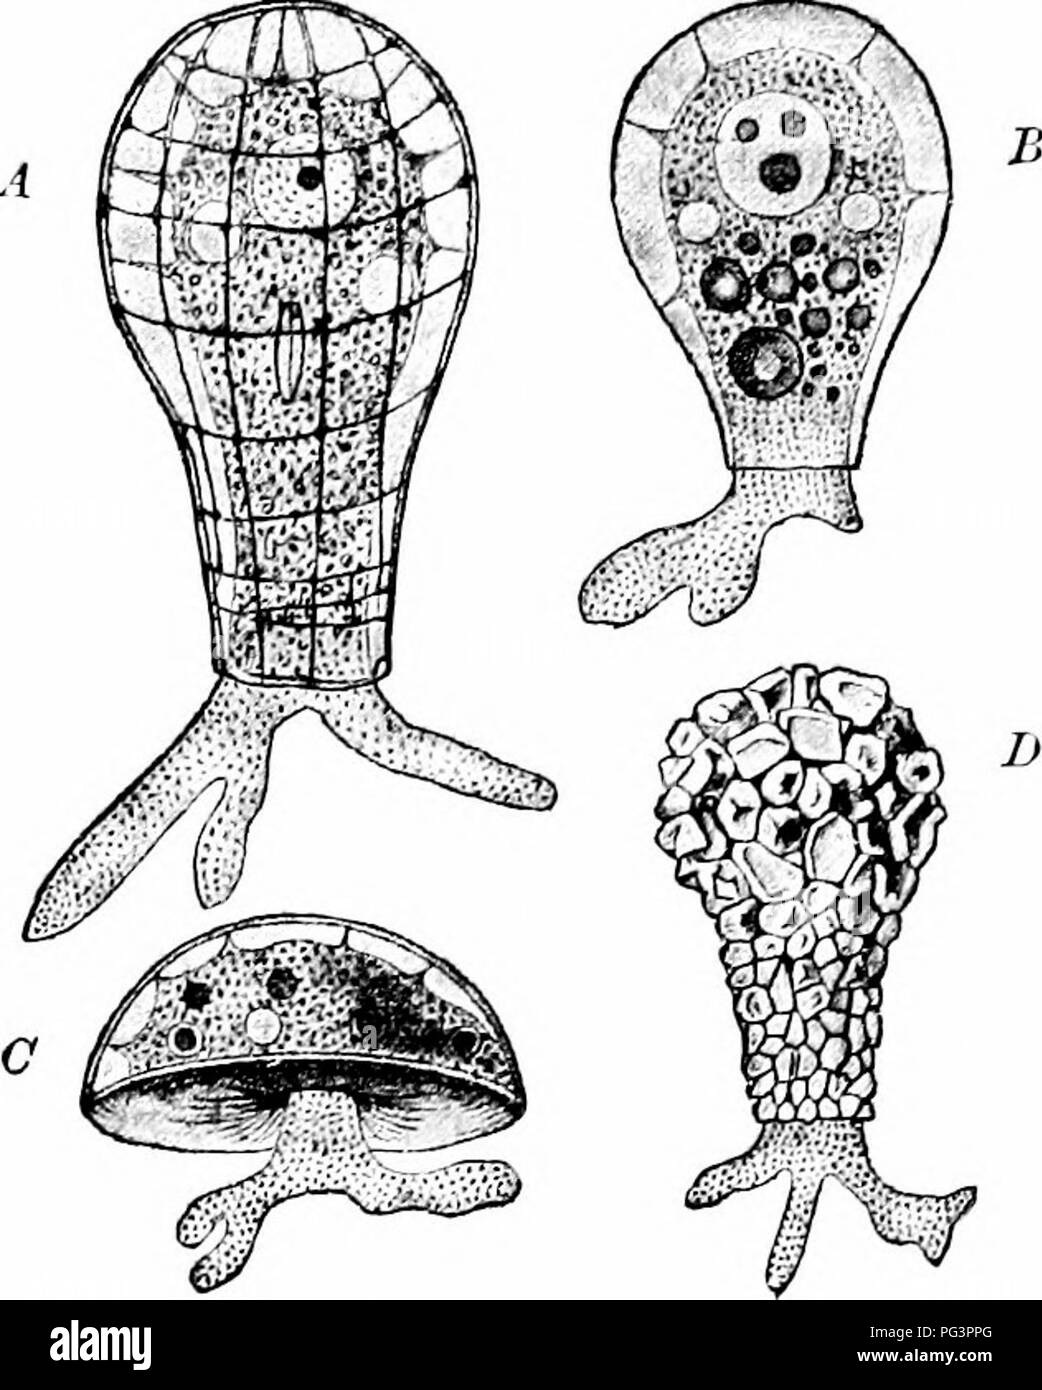 . A manual of zoology. 20 MANUAL OF ZOOLOGY shot. body within the shell (Stokes). An even commoner member of the group is Arcella (Fig. 3, C). Arcella has a shell much wider than that of Difflugia, convex on one side, flat on the other. In the middle of the flat surface is a rounded opening. The shell of Arcella is of a transparent, tough. Fig. 3.—A, Quadrula symmetrica; B, Hyalosphenia lata; C, Arcella vulgaris; D, Difflugia pyriformis. (From Lang's Comparative Anatomy, after Schulze and Wallich.) material, which is said to be chitinoid from the fact that it appears to resemble a substance te Stock Photo